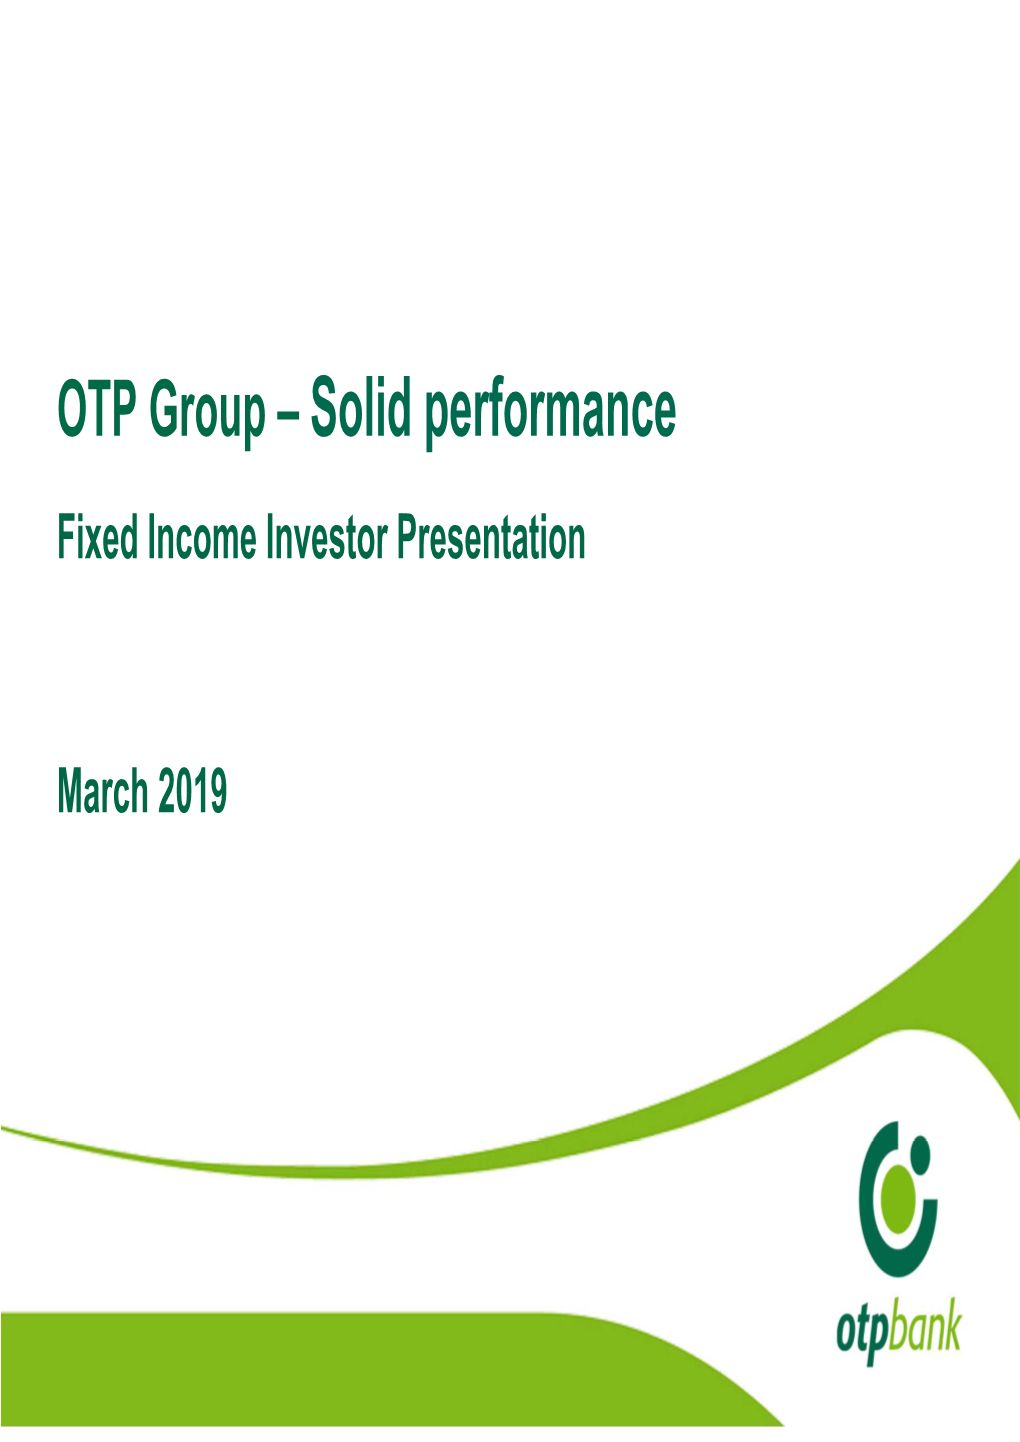 OTP Group – Solid Performance Fixed Income Investor Presentation